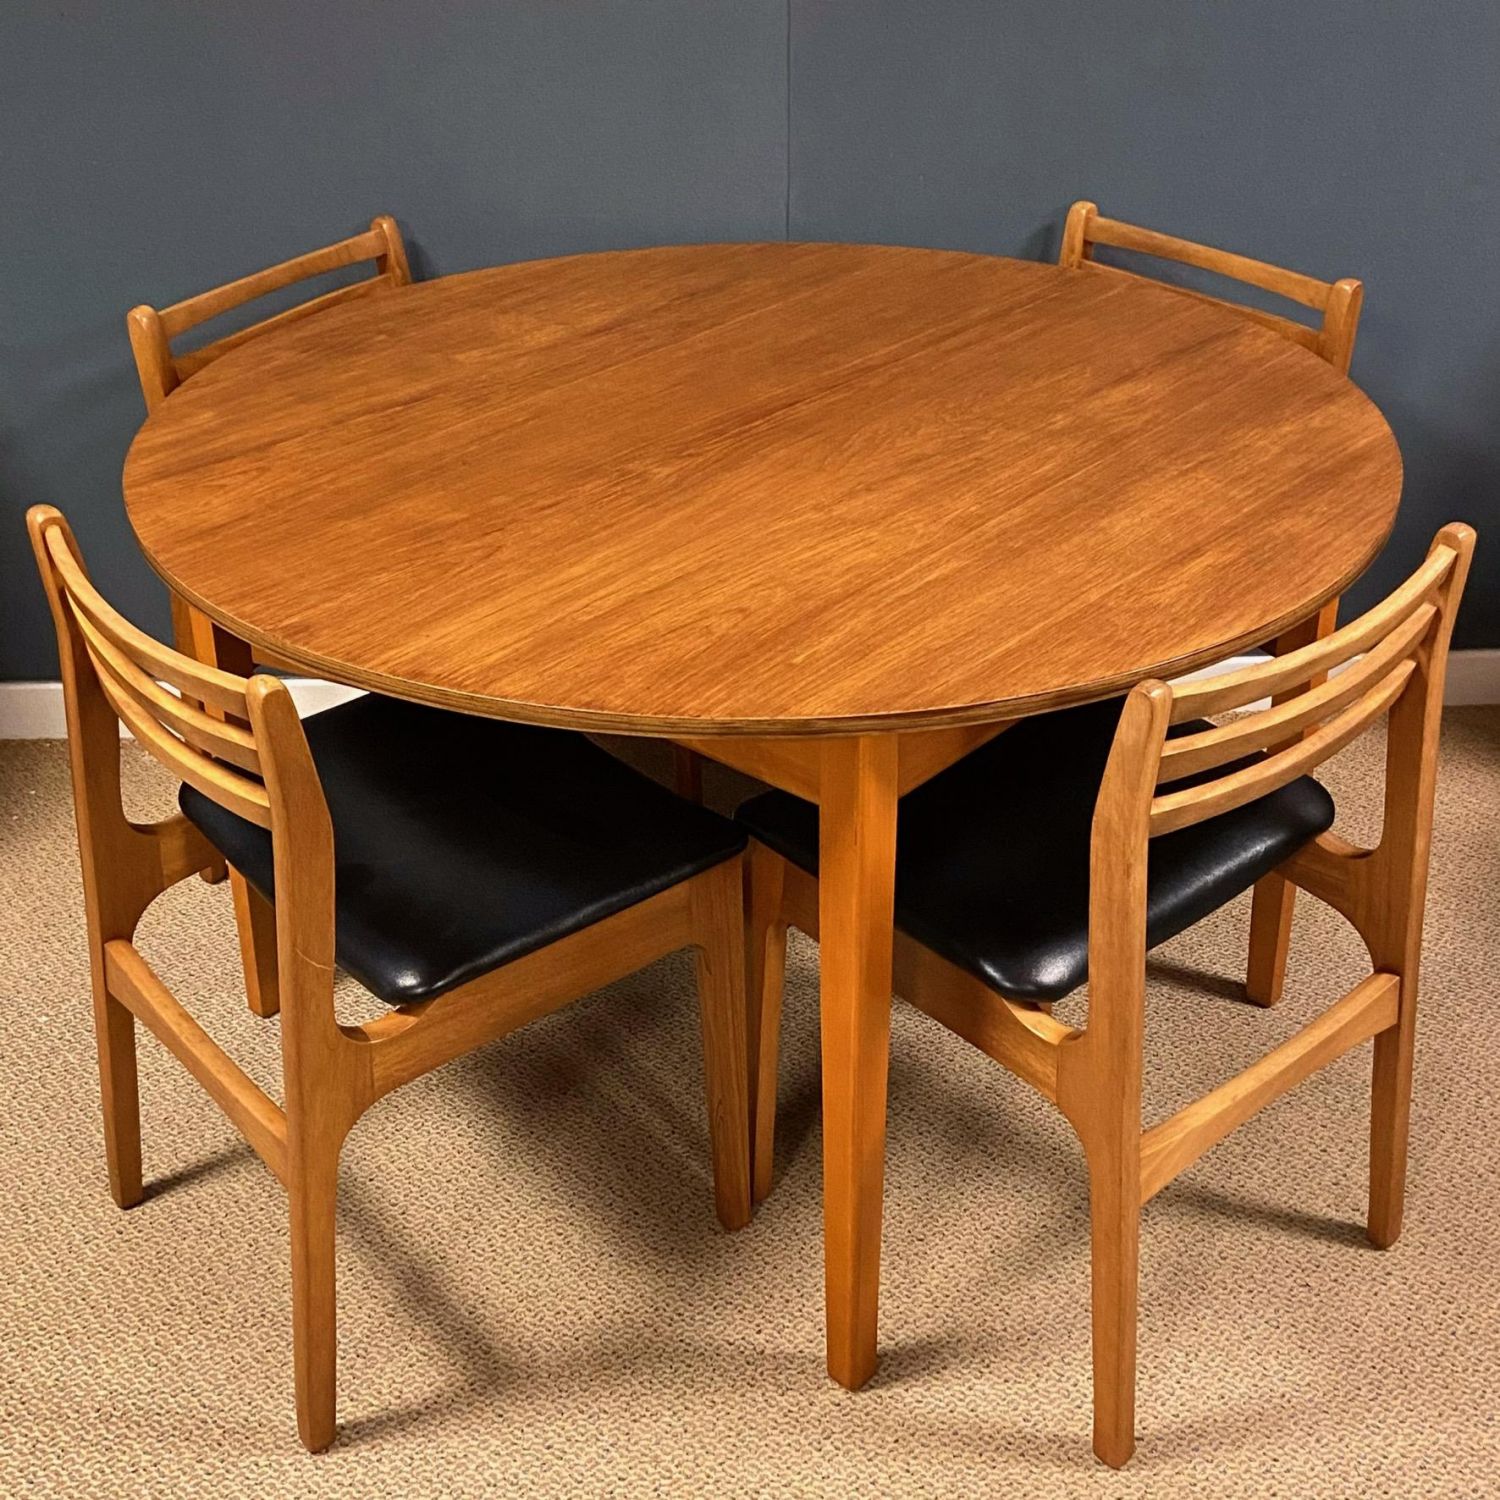 1970s Teak Dining Table And Four Chairs, Teak Dining Room Chairs